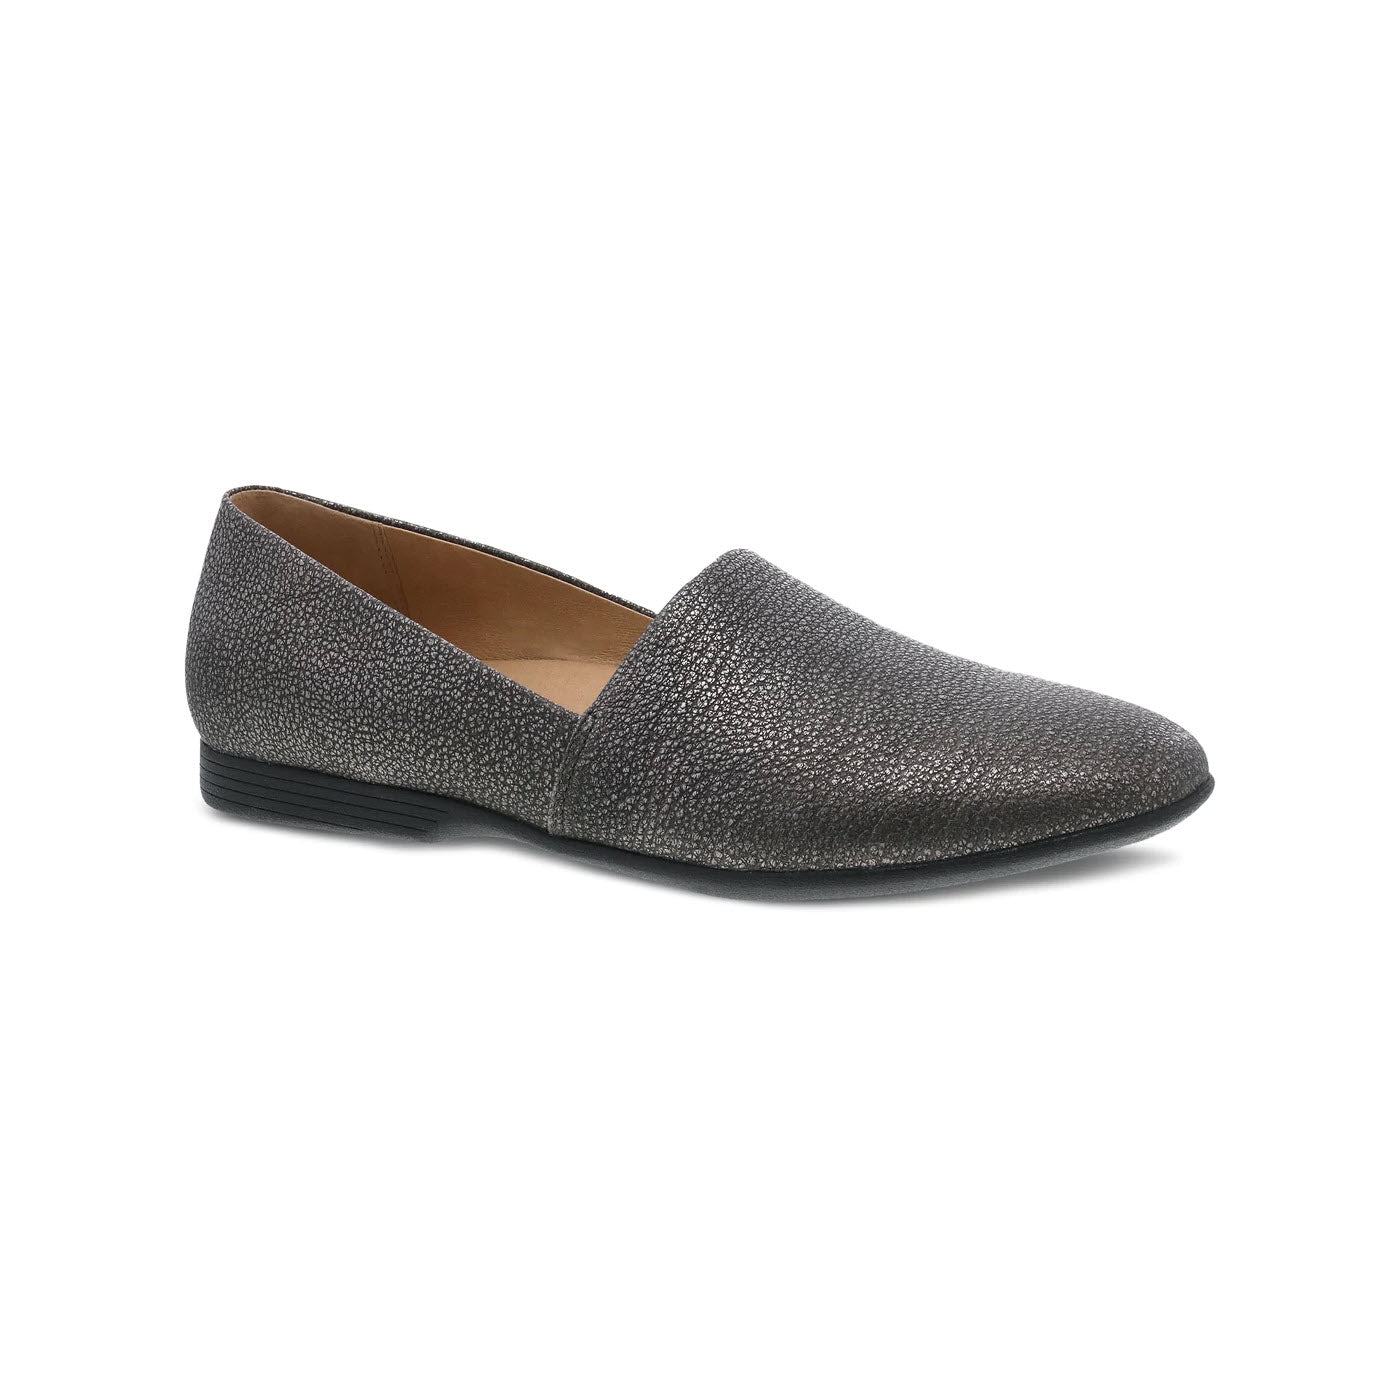 A Dansko Larisa pewter metallic loafer with leather uppers, a low heel, and a pointed toe, displayed against a white background.